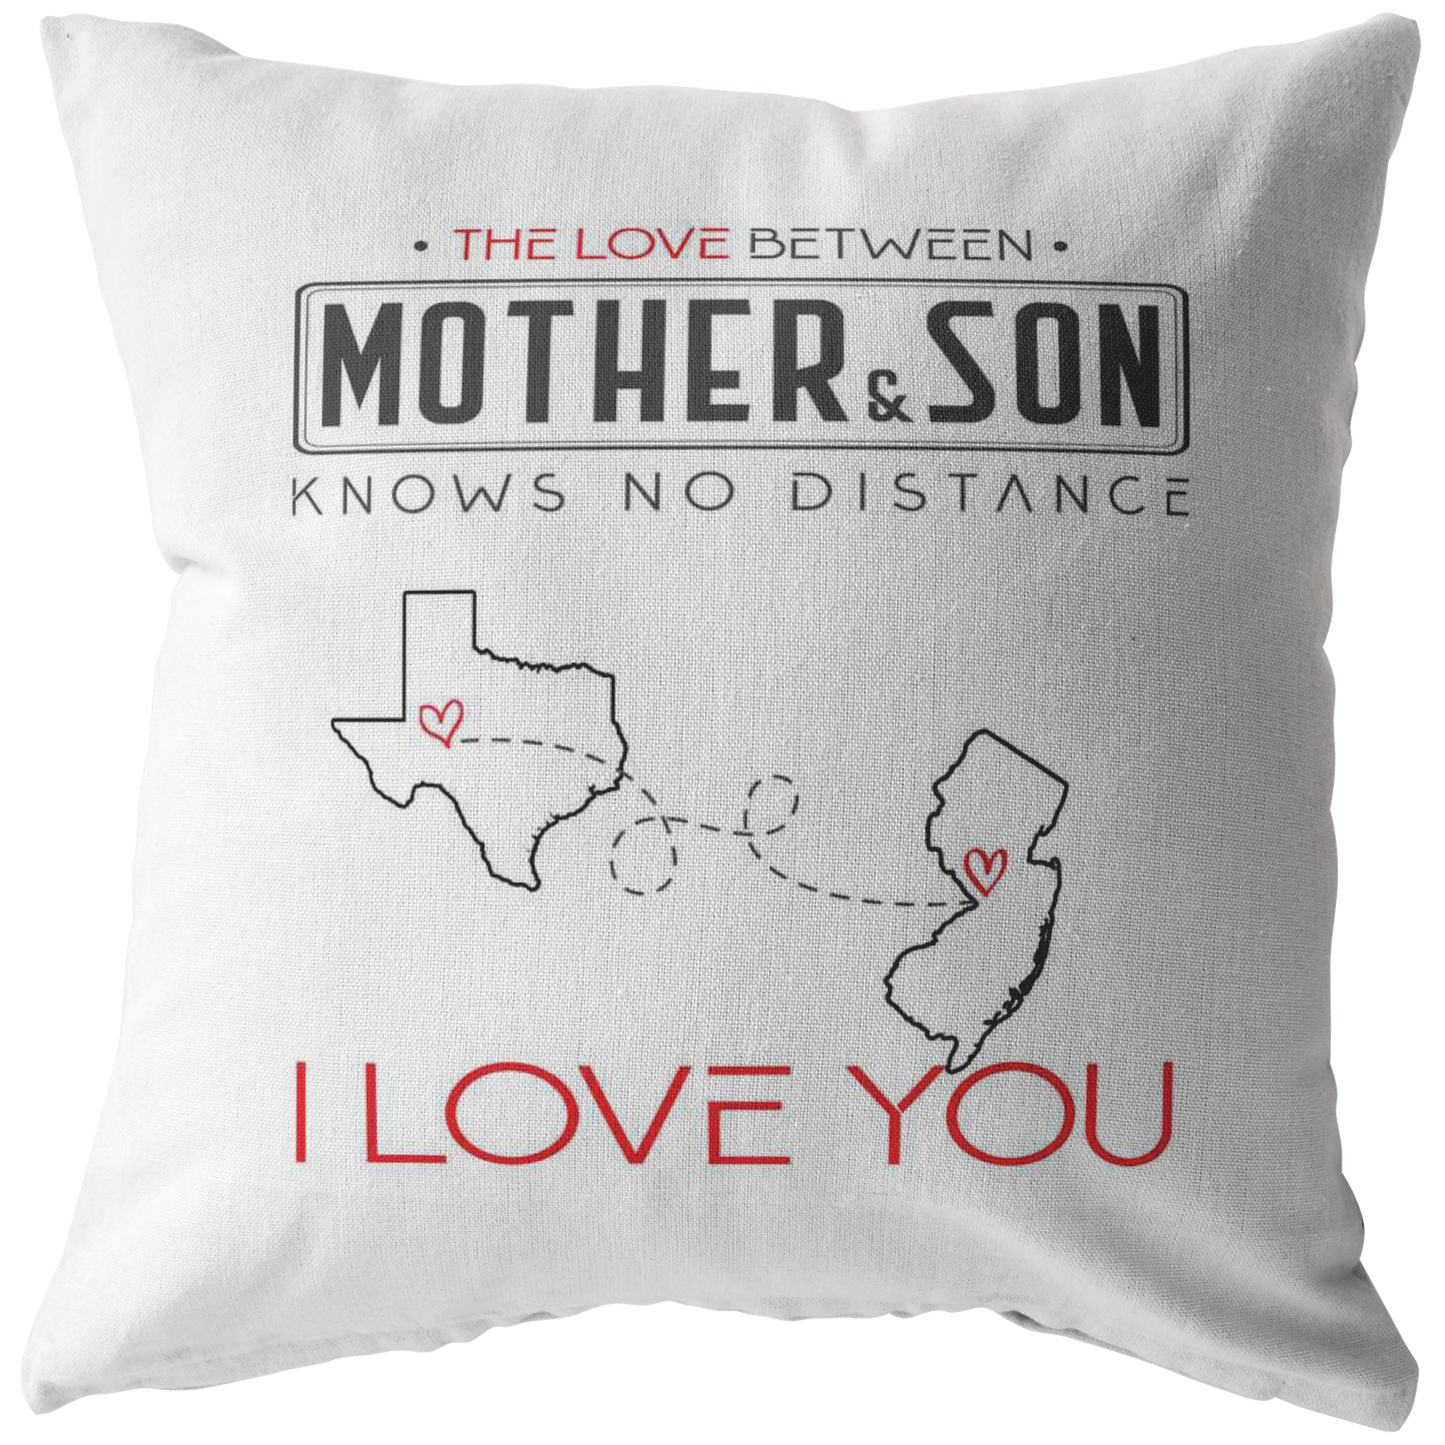 ND-pl20419534-sp-23141 - Mothers Day Gifts For Mom - The Love Between Mother  Son K